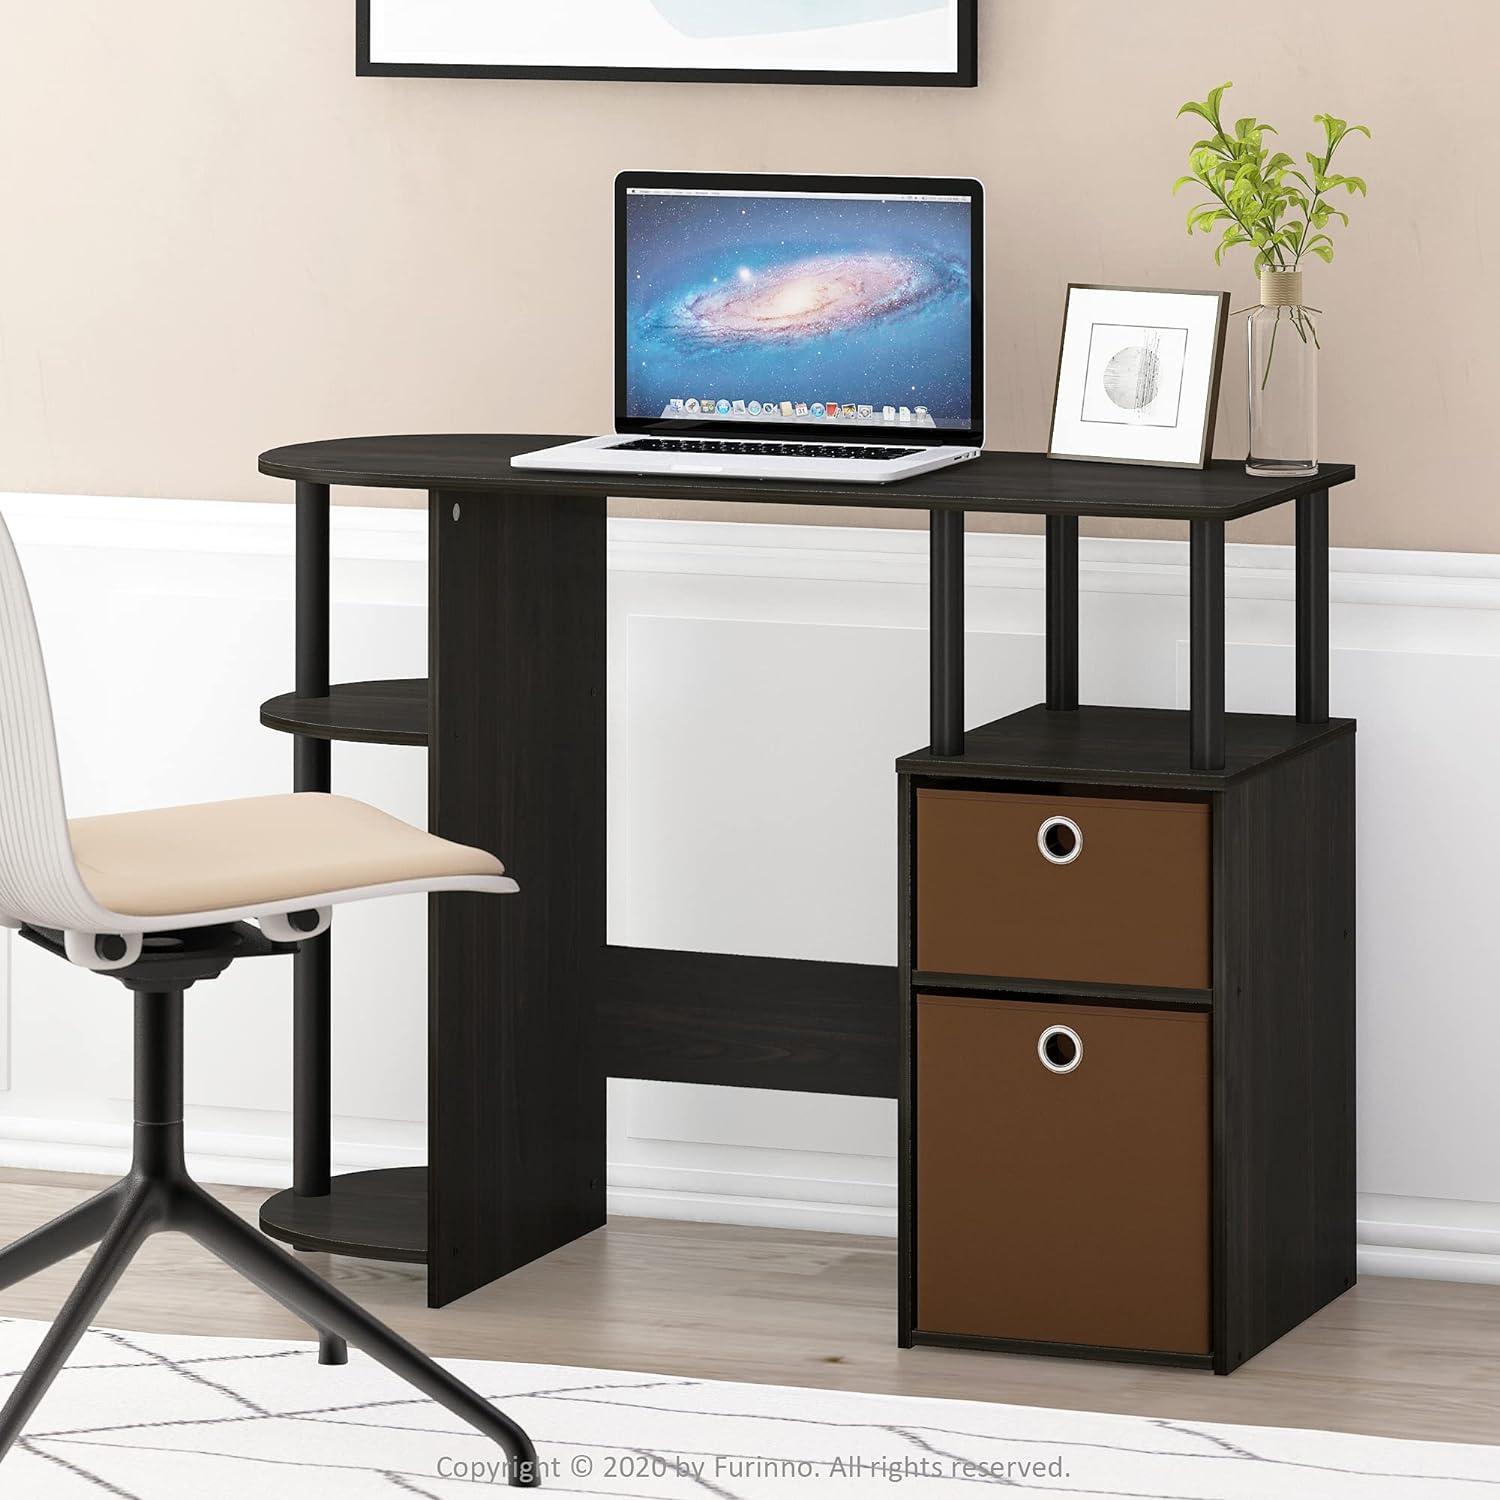 Espresso Composite Wood Study Desk with Drawer and Shelves